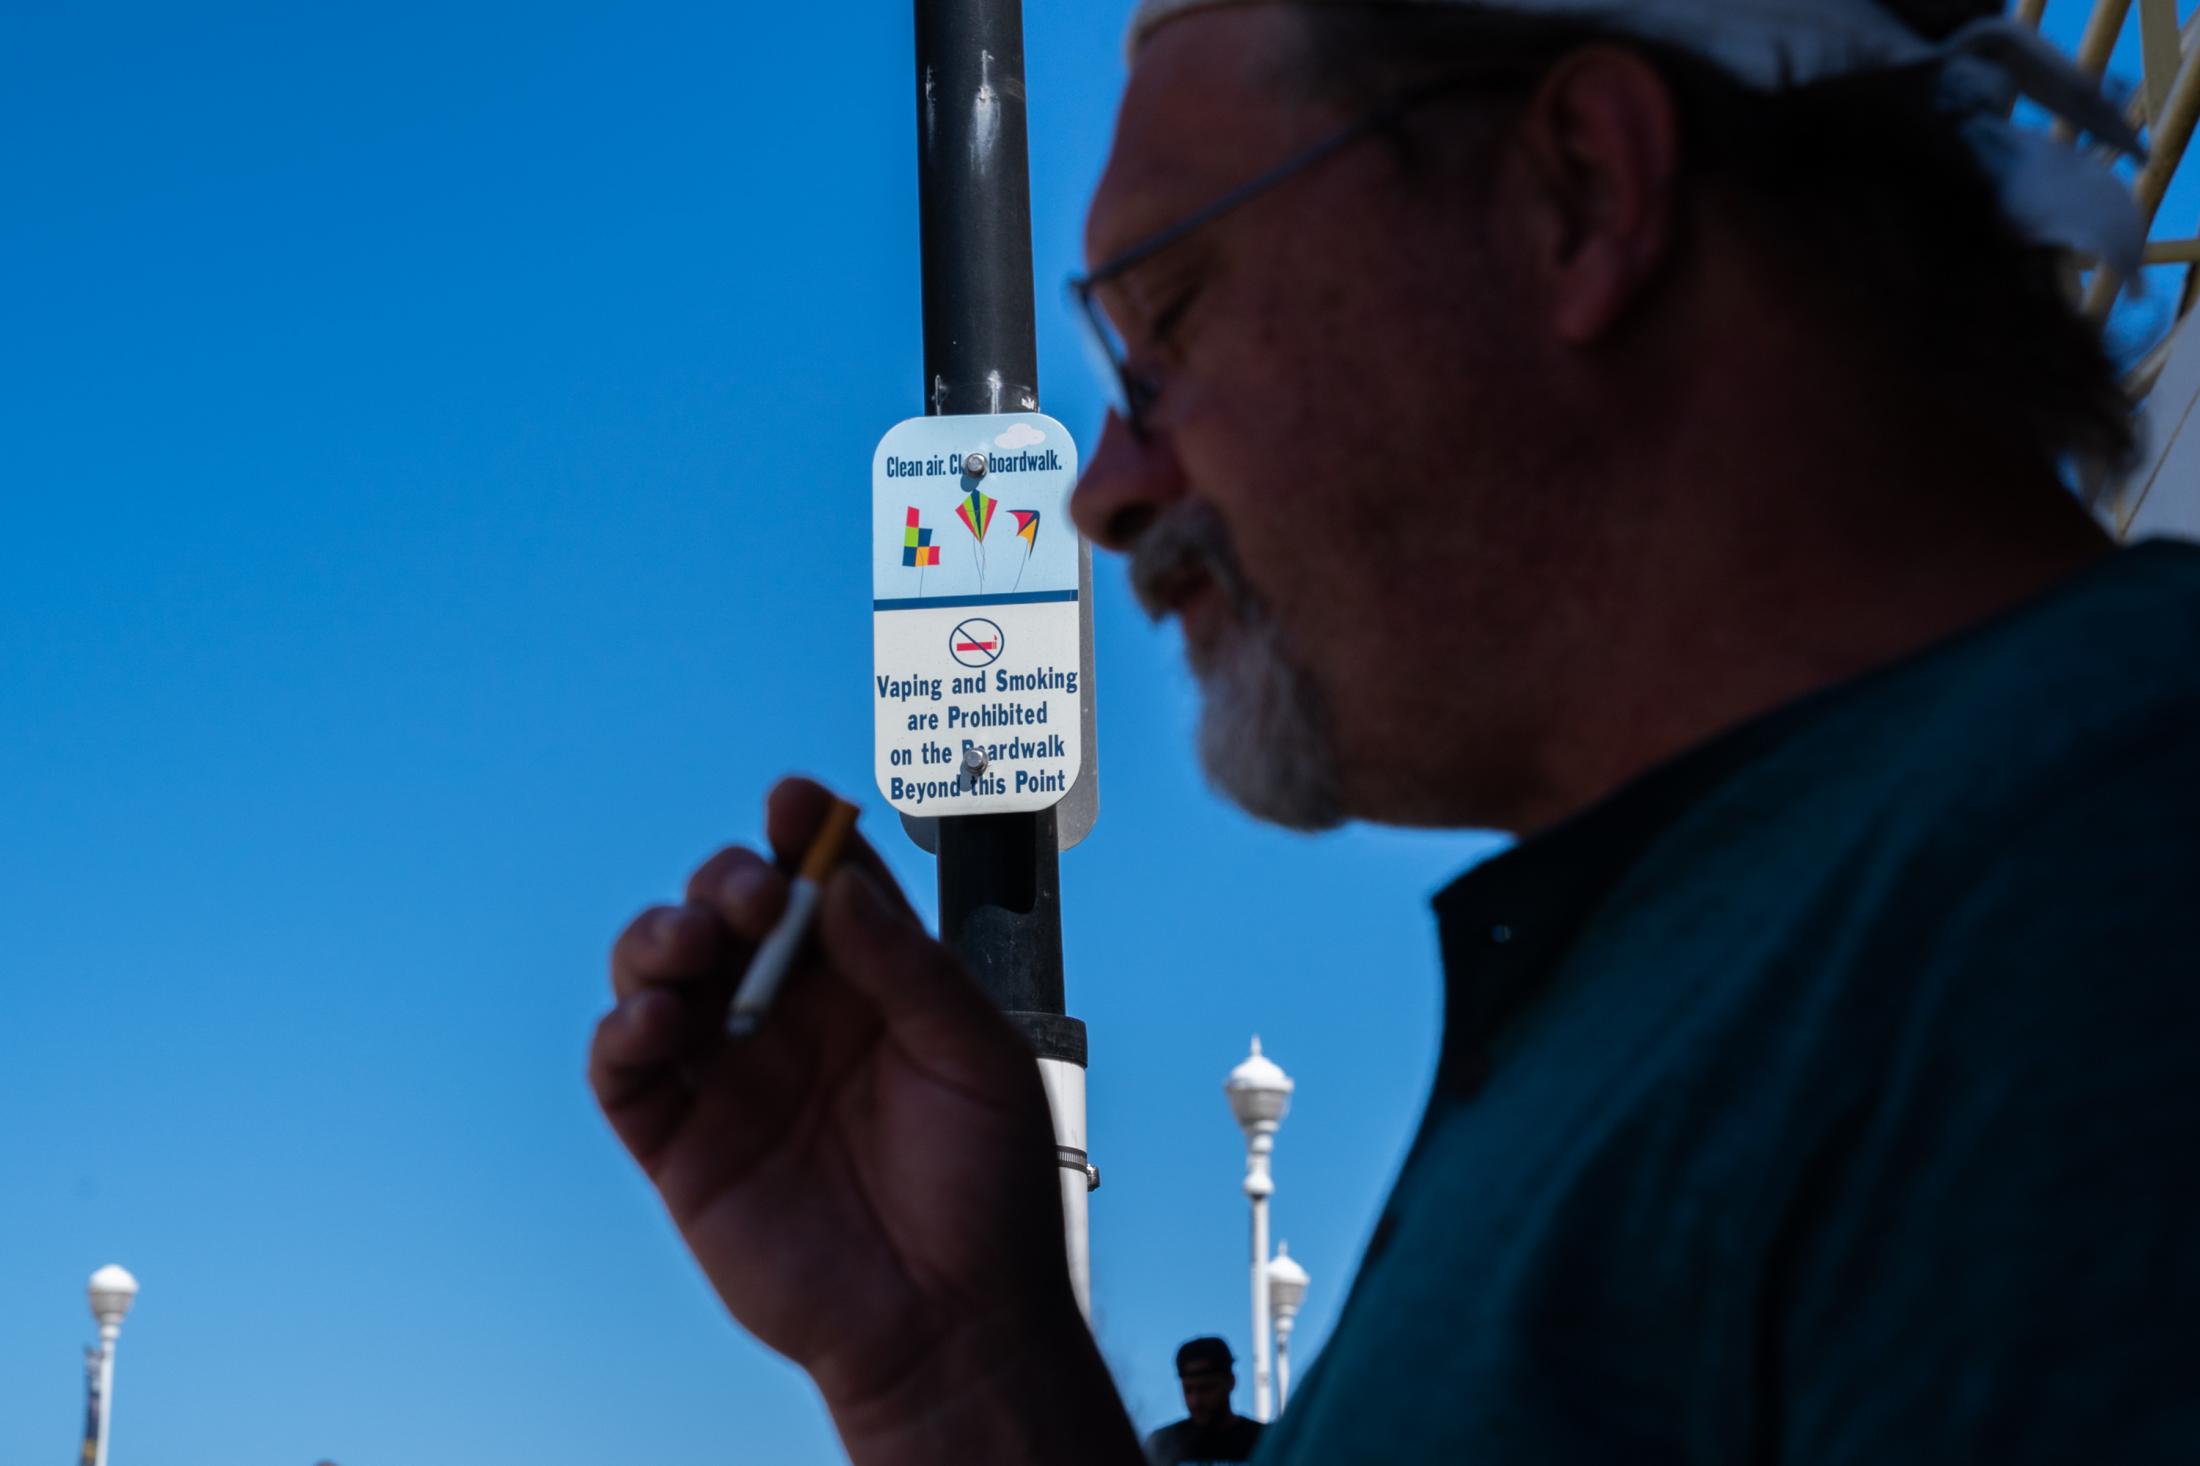 Questions about policing on Ocean City Boardwalk - Randy Testerman smokes beyond the restriction area near...